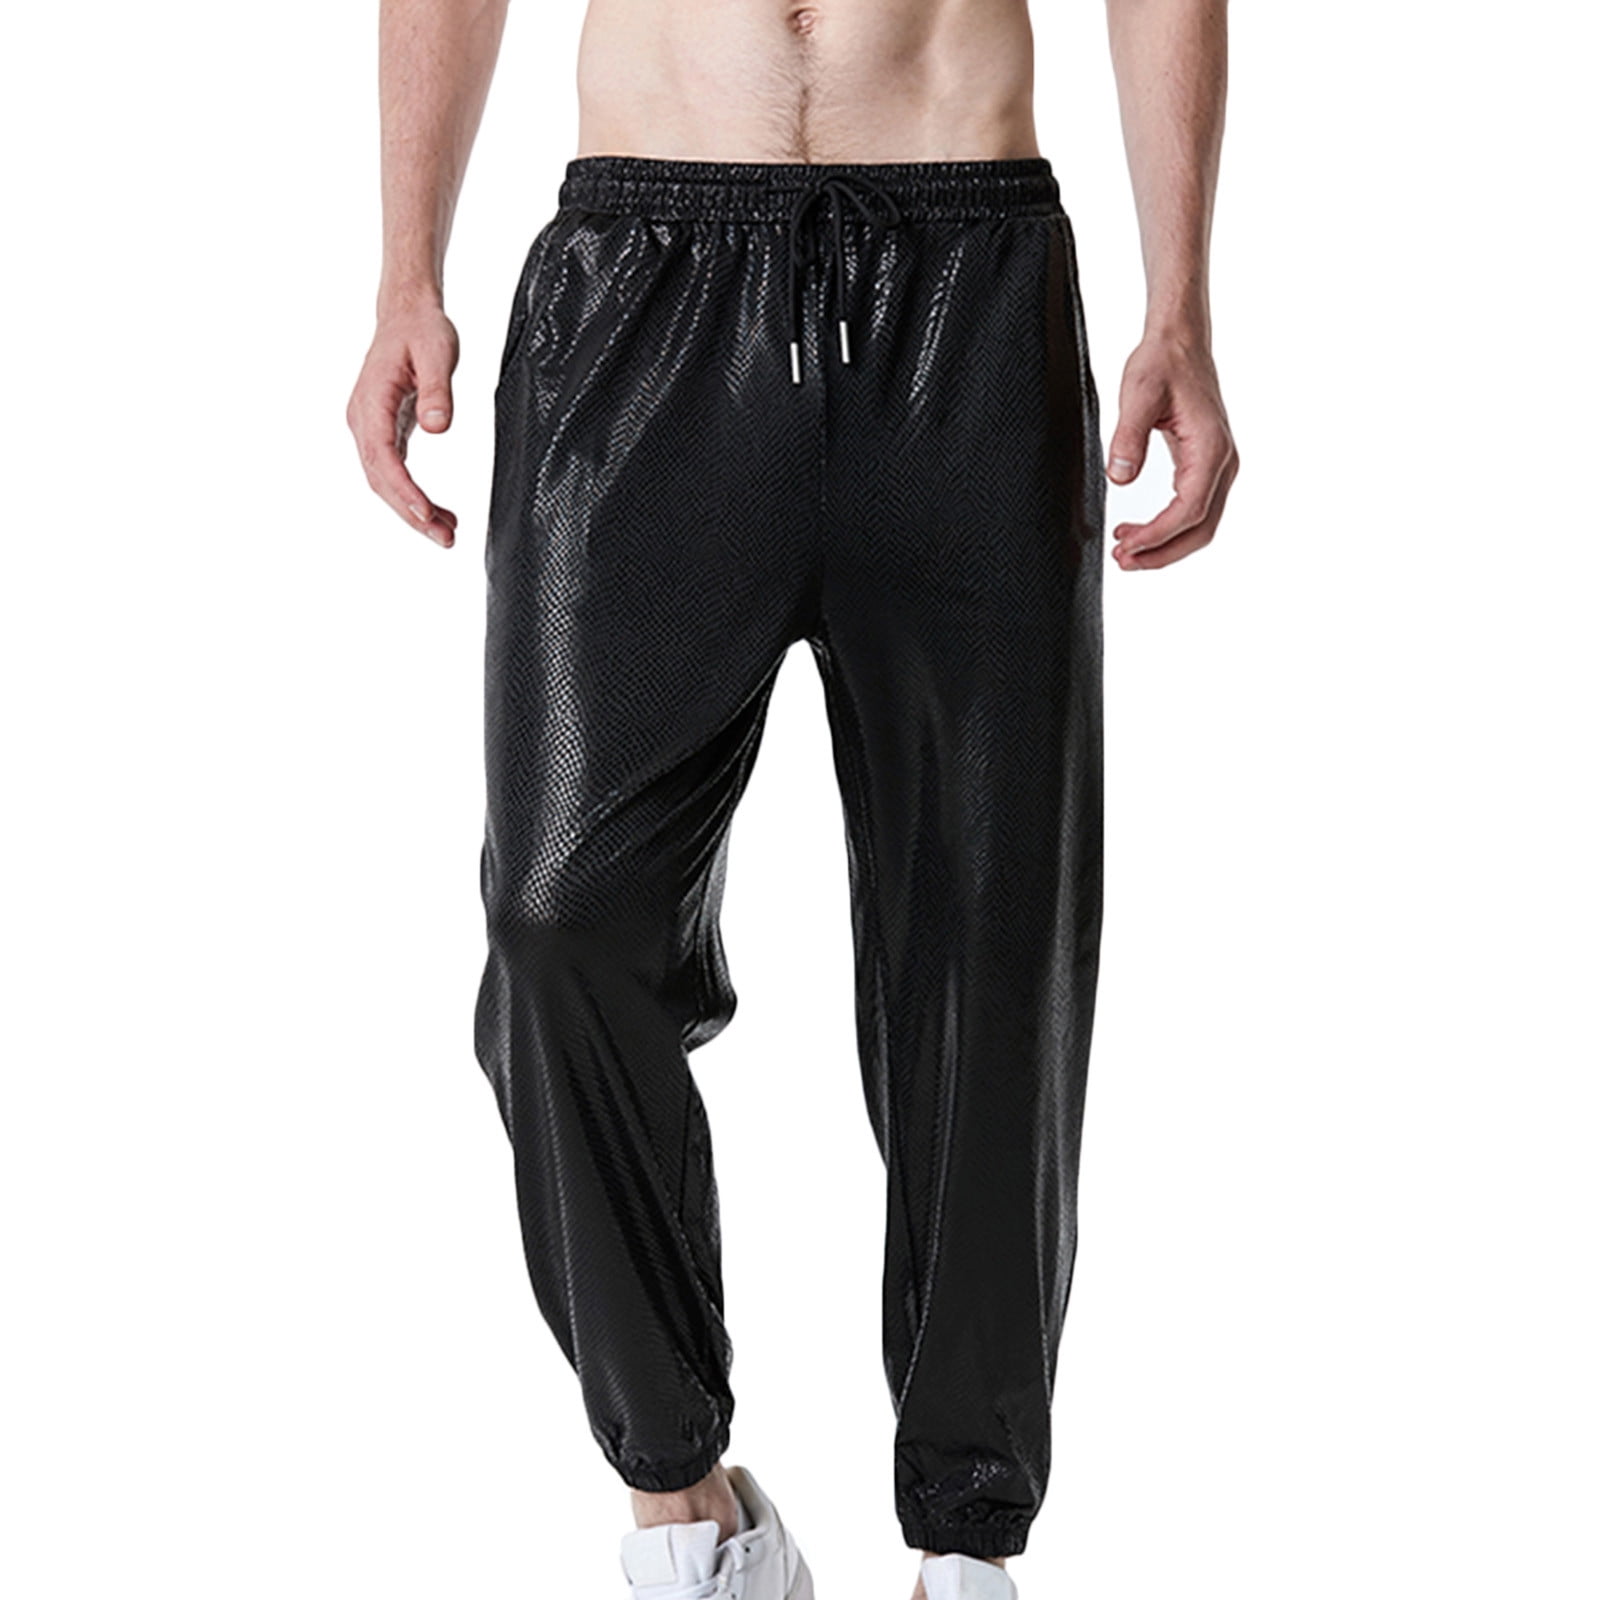 Black and Friday Deals Blueek Men Casual Fashion Lace-Up Elasticated Snake  Gold Print Track Pants Drawstring Trousers 